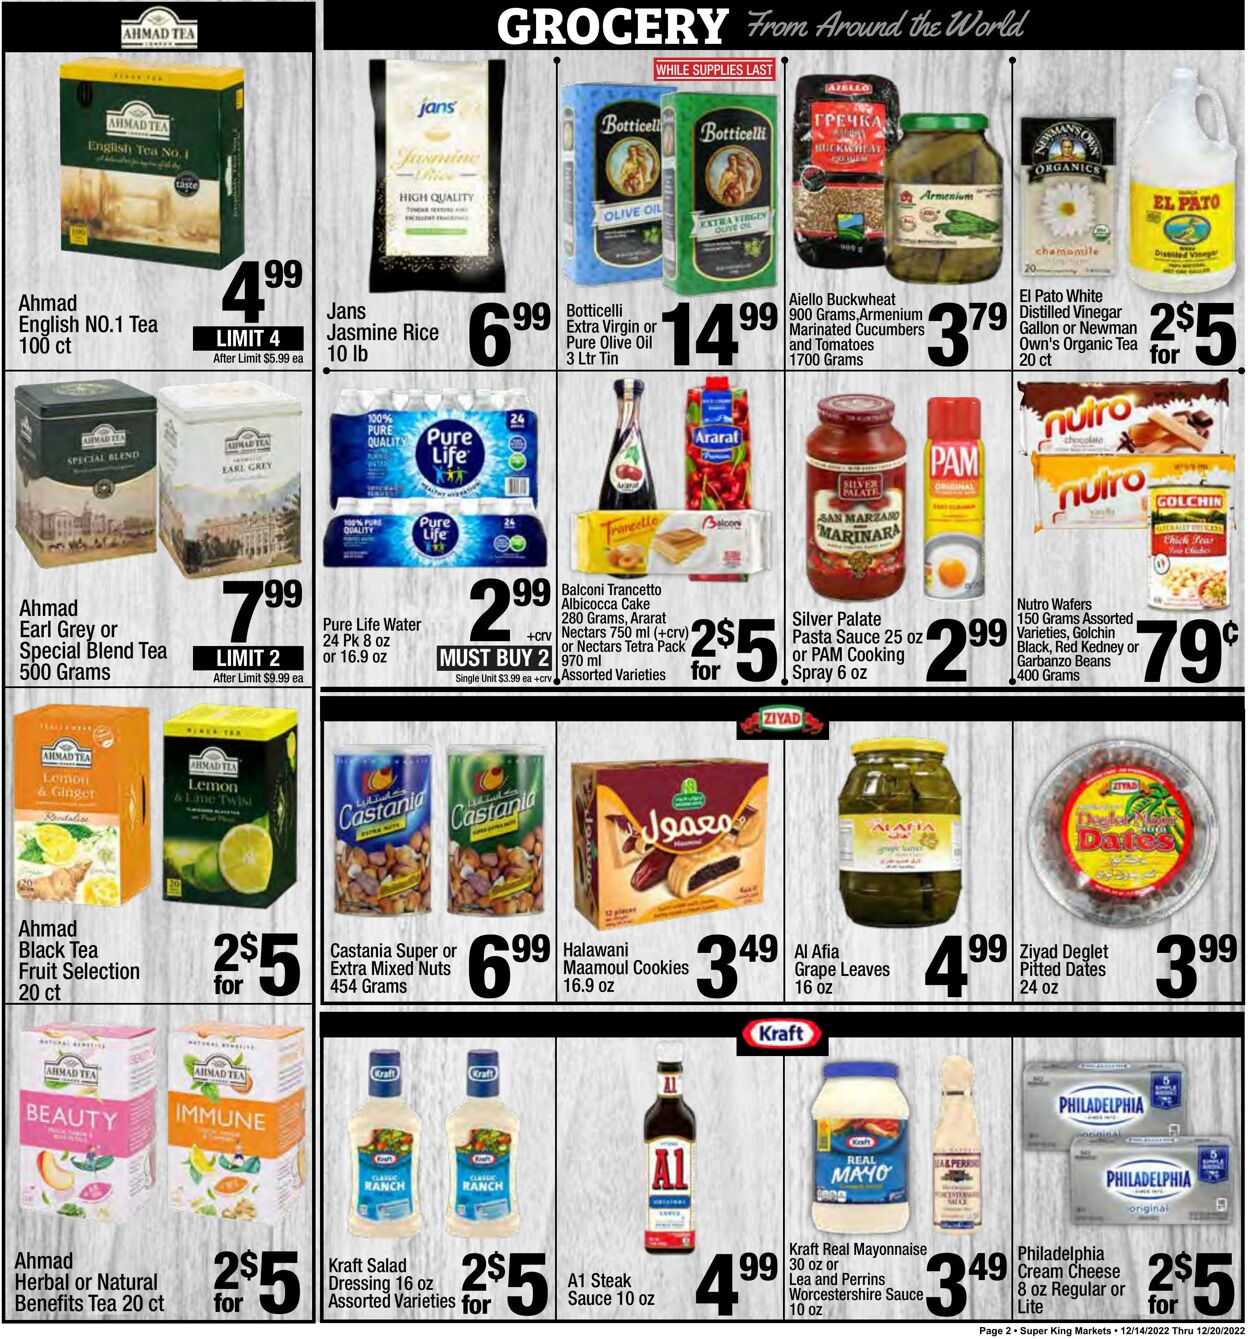 Weekly ad Super King Markets 12/14/2022 - 12/20/2022